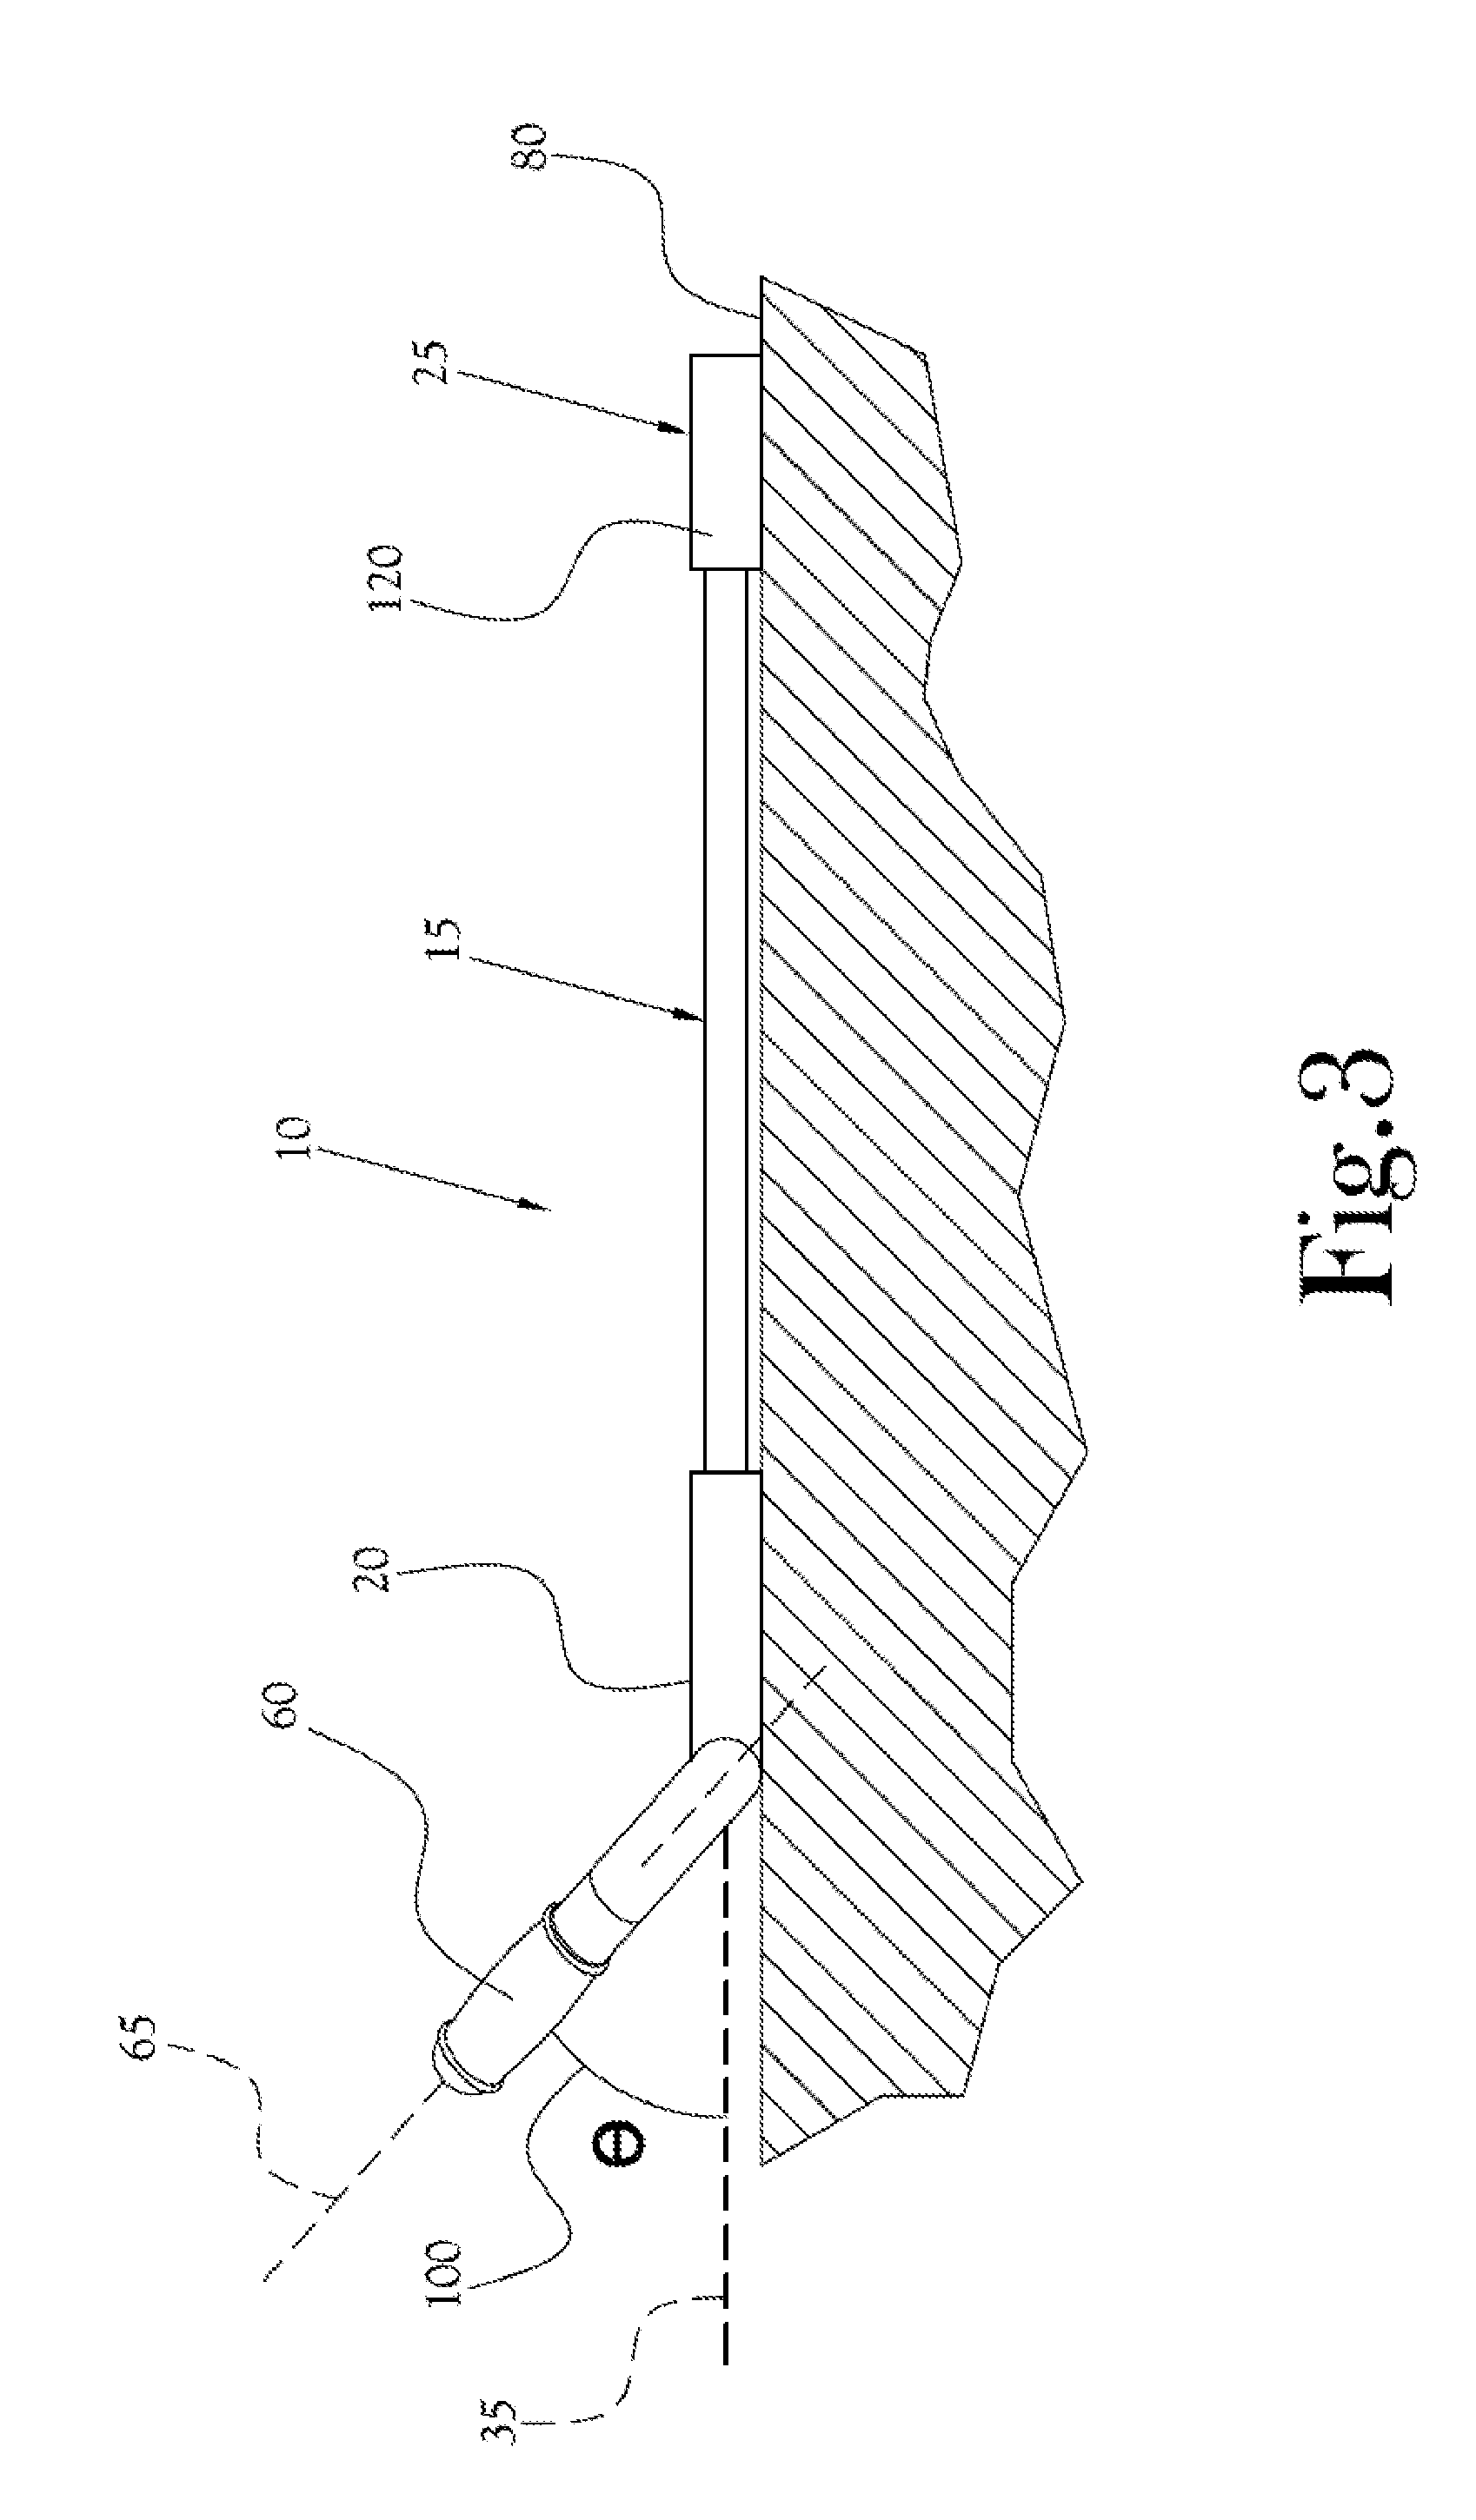 Exercise Device for Use as a Walking Stick Having an Ergonomically Angled Handle